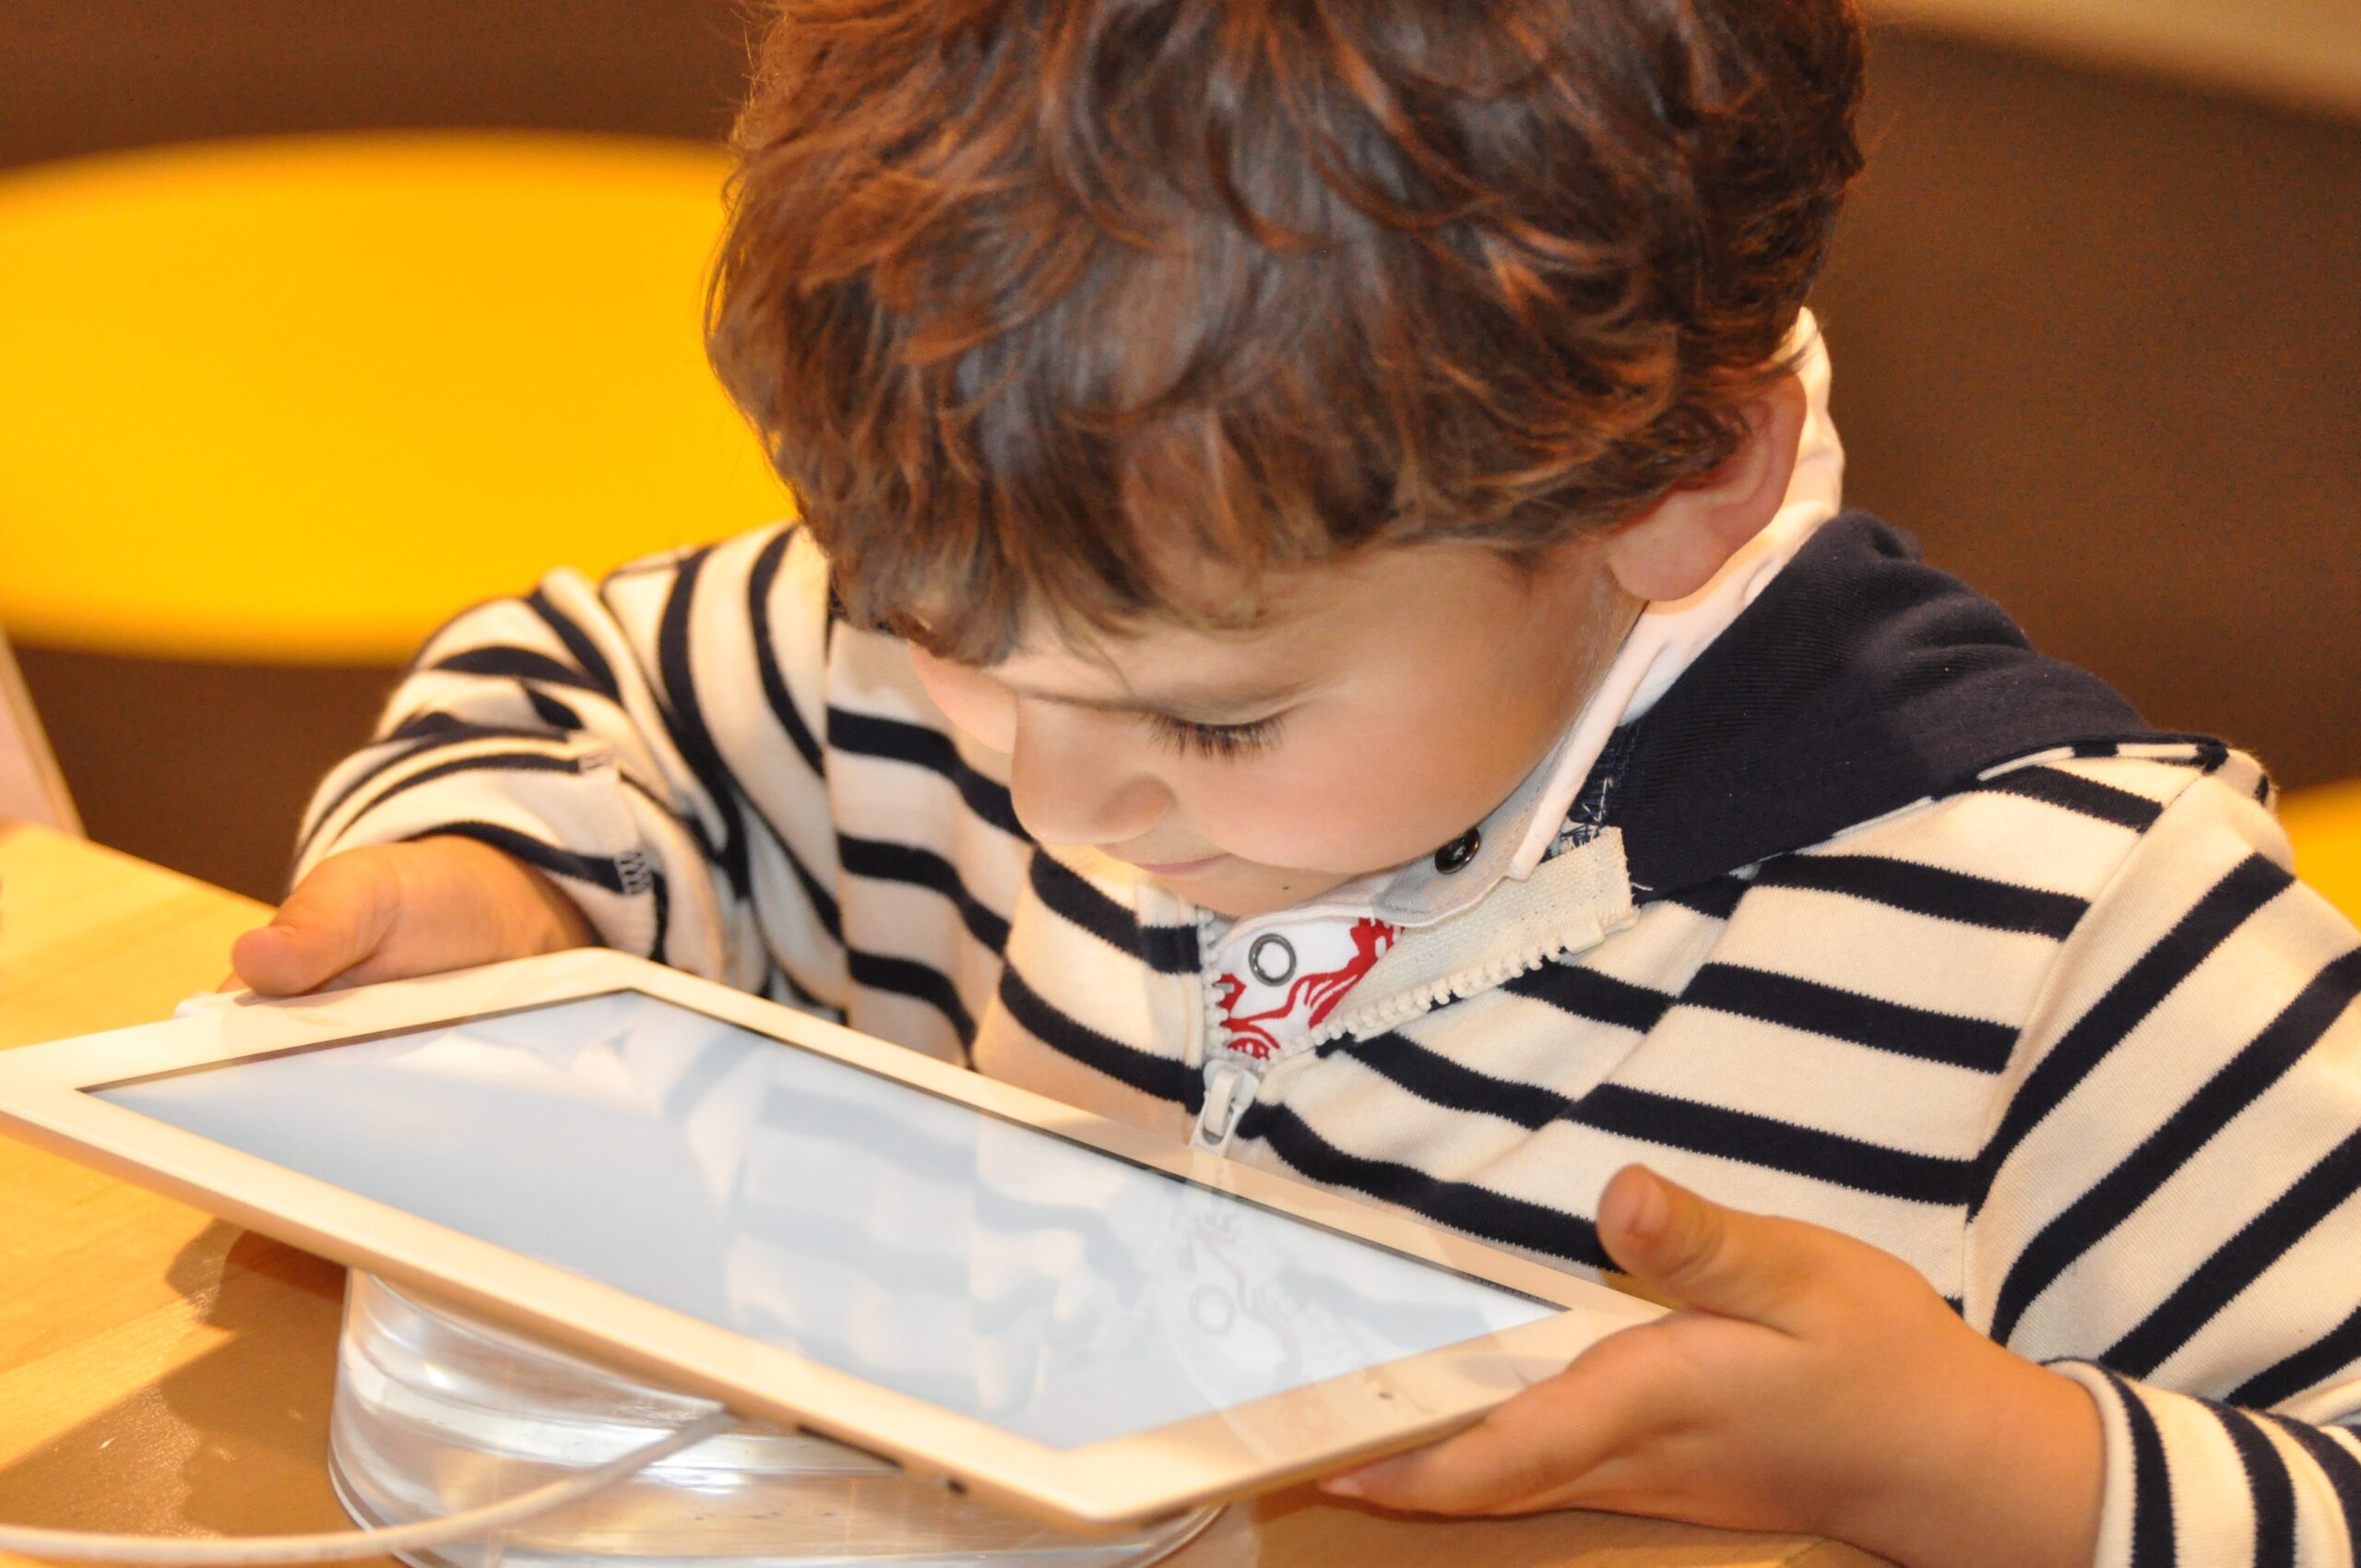 Ofcom report finds many young children using social media unsupervised